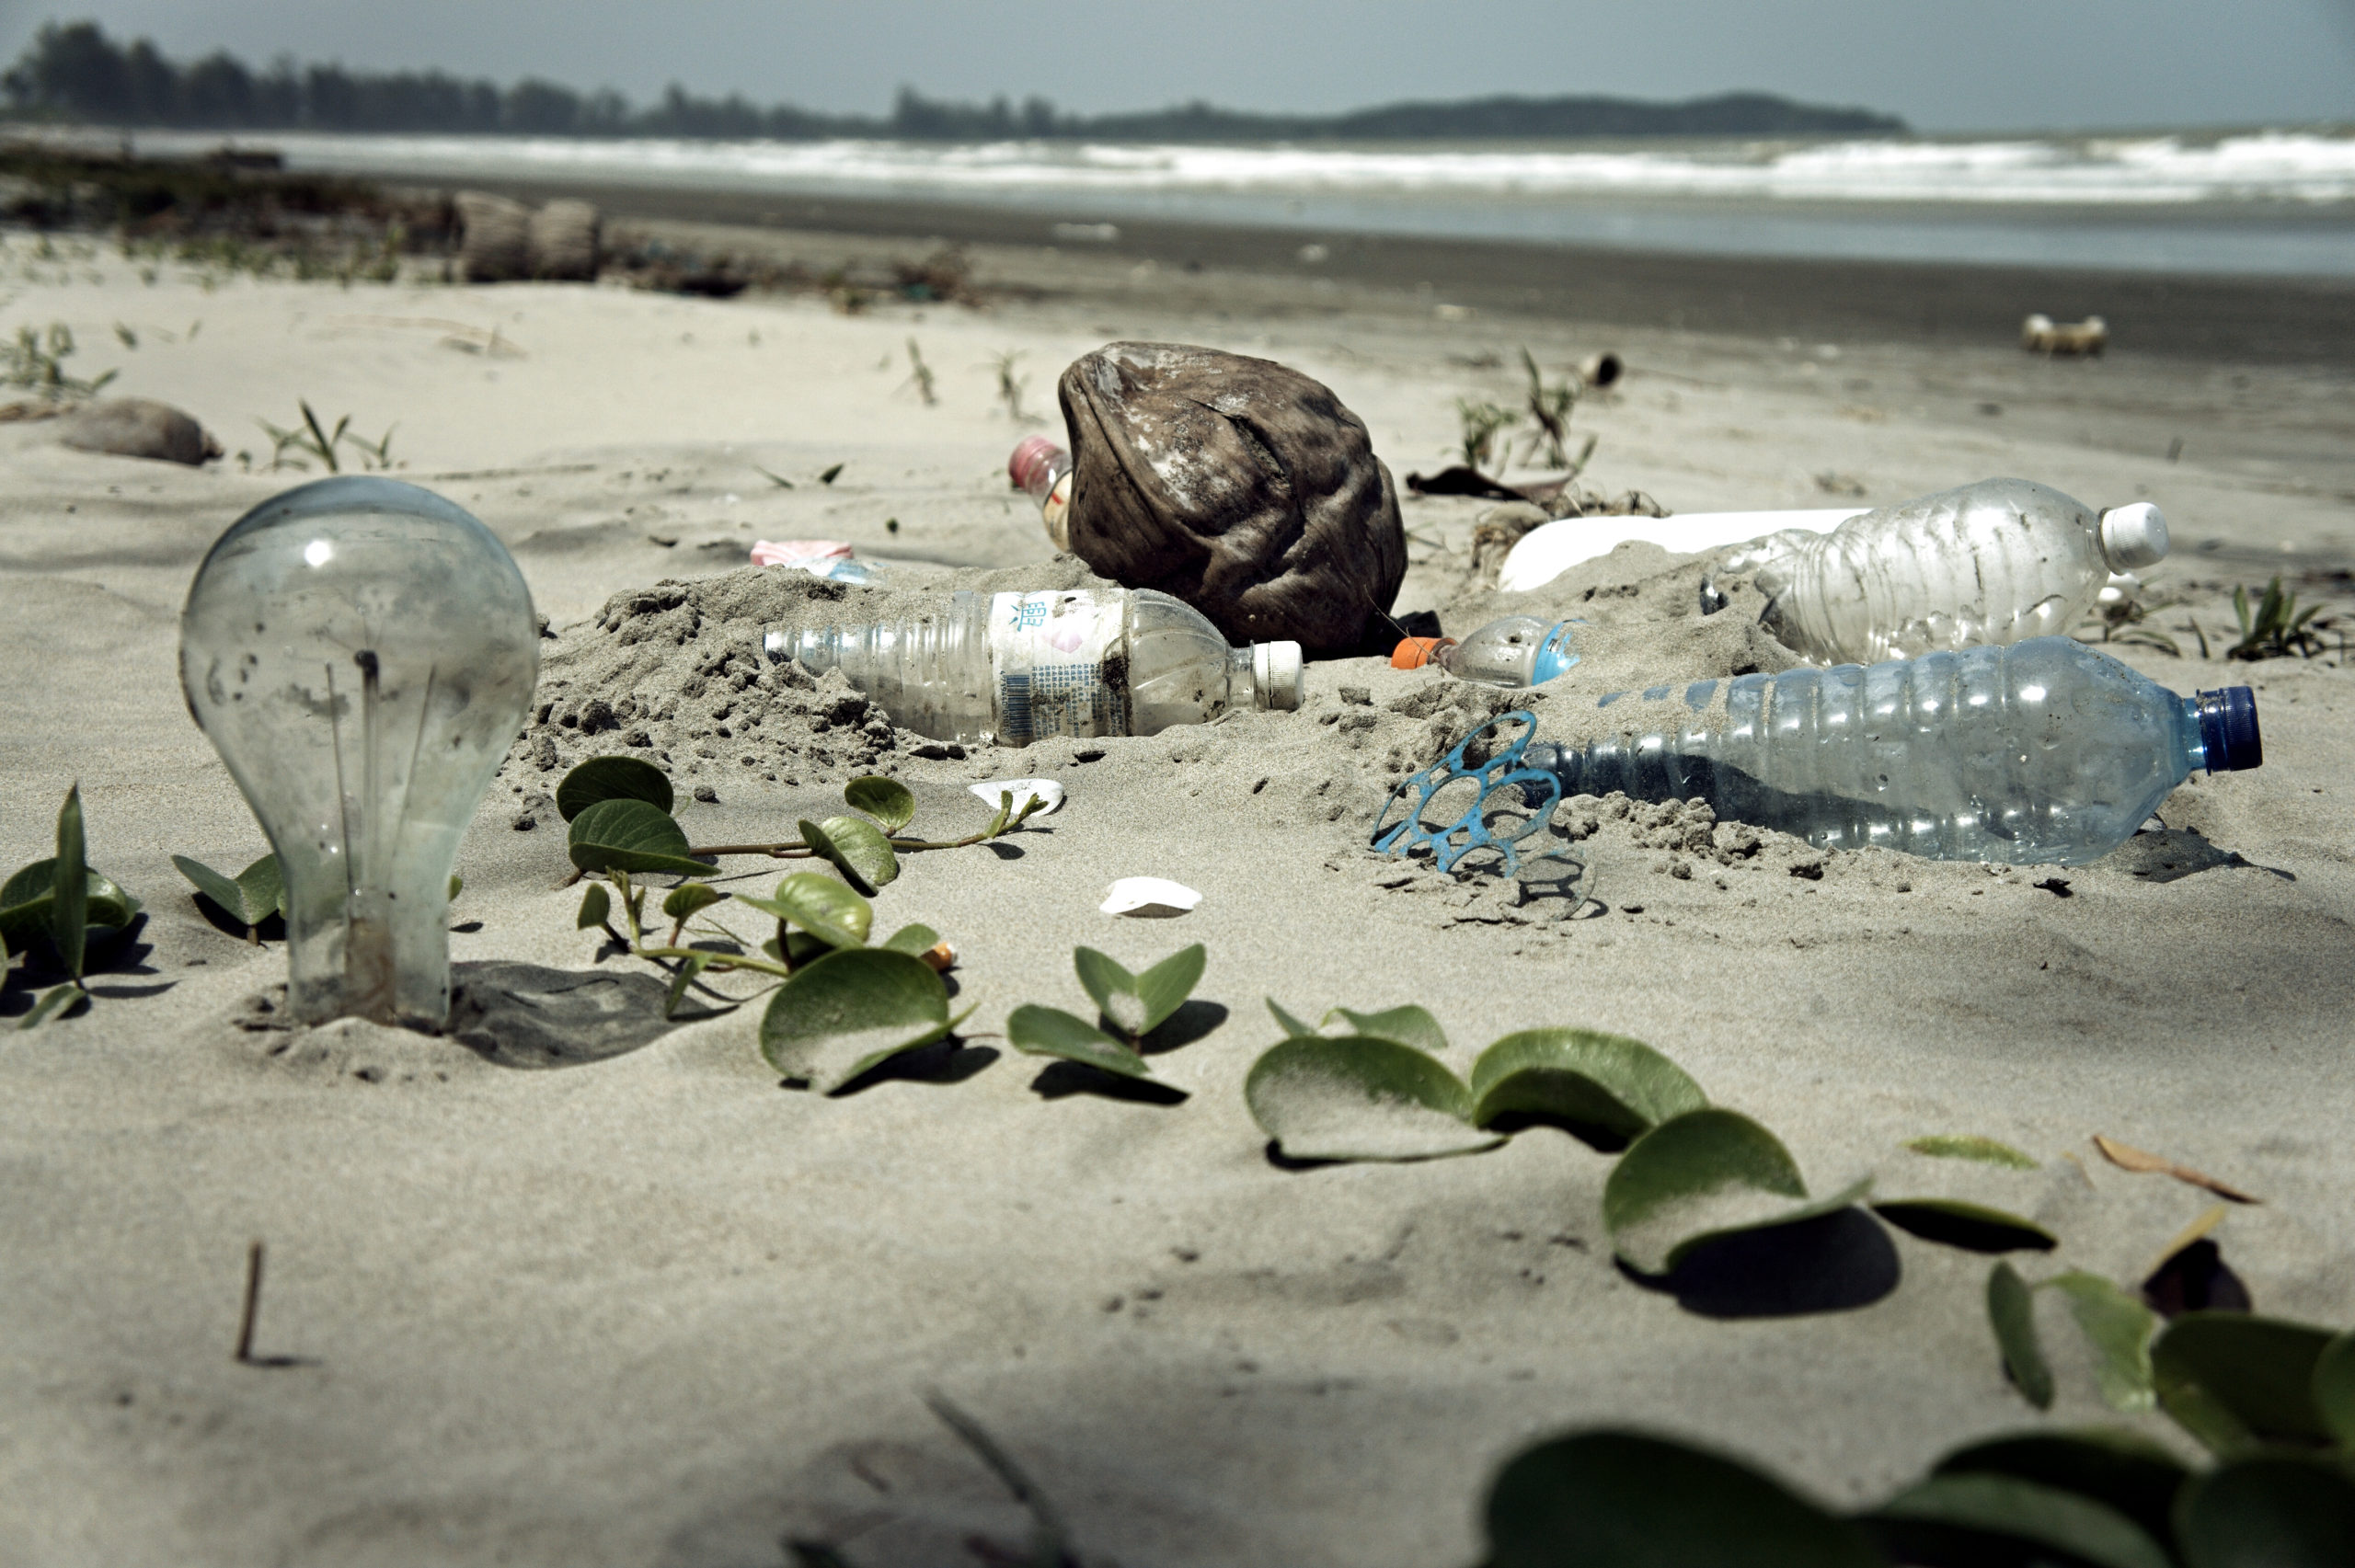 Image showing plastic pollution found on beach in Malaysia